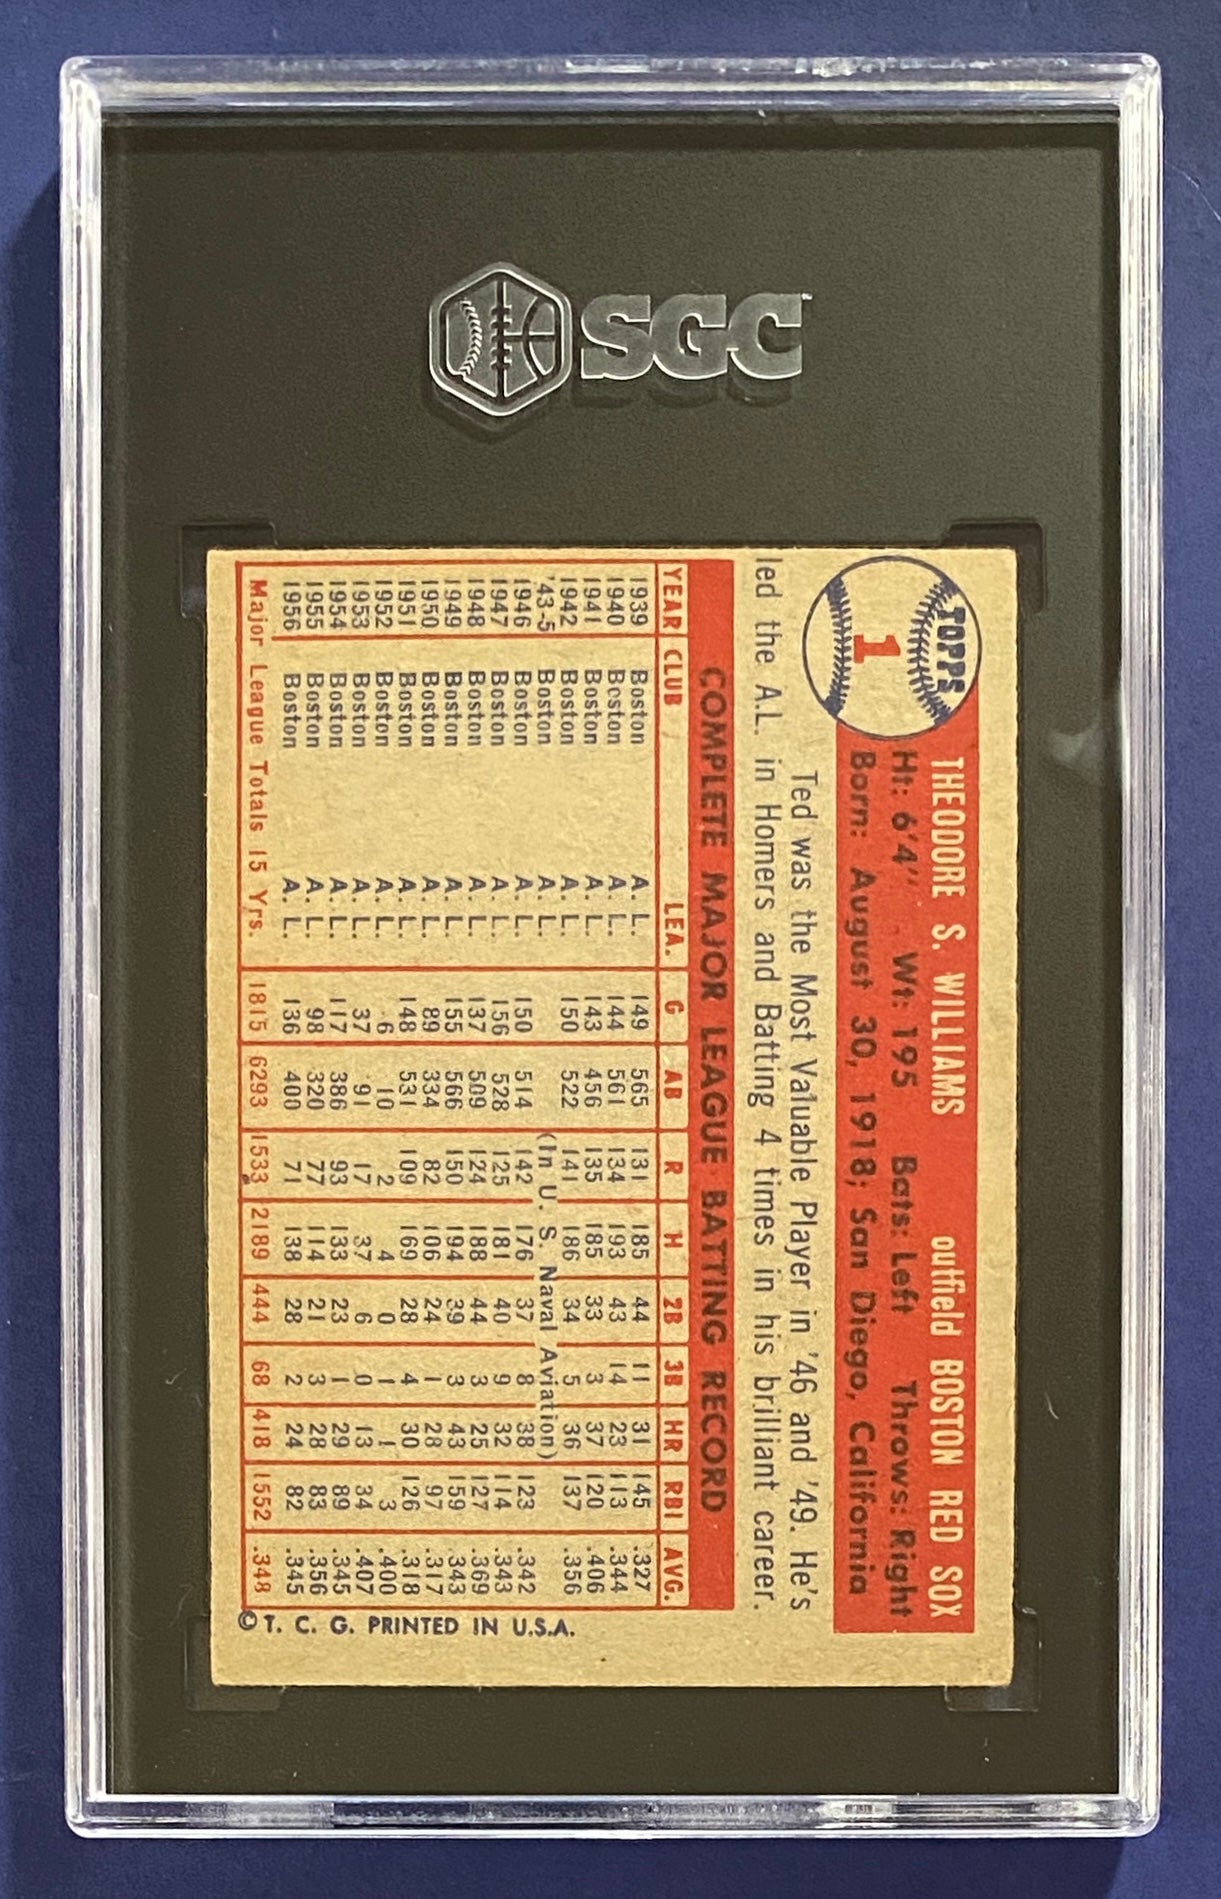 Ted Williams 1957 Topps SGC 4